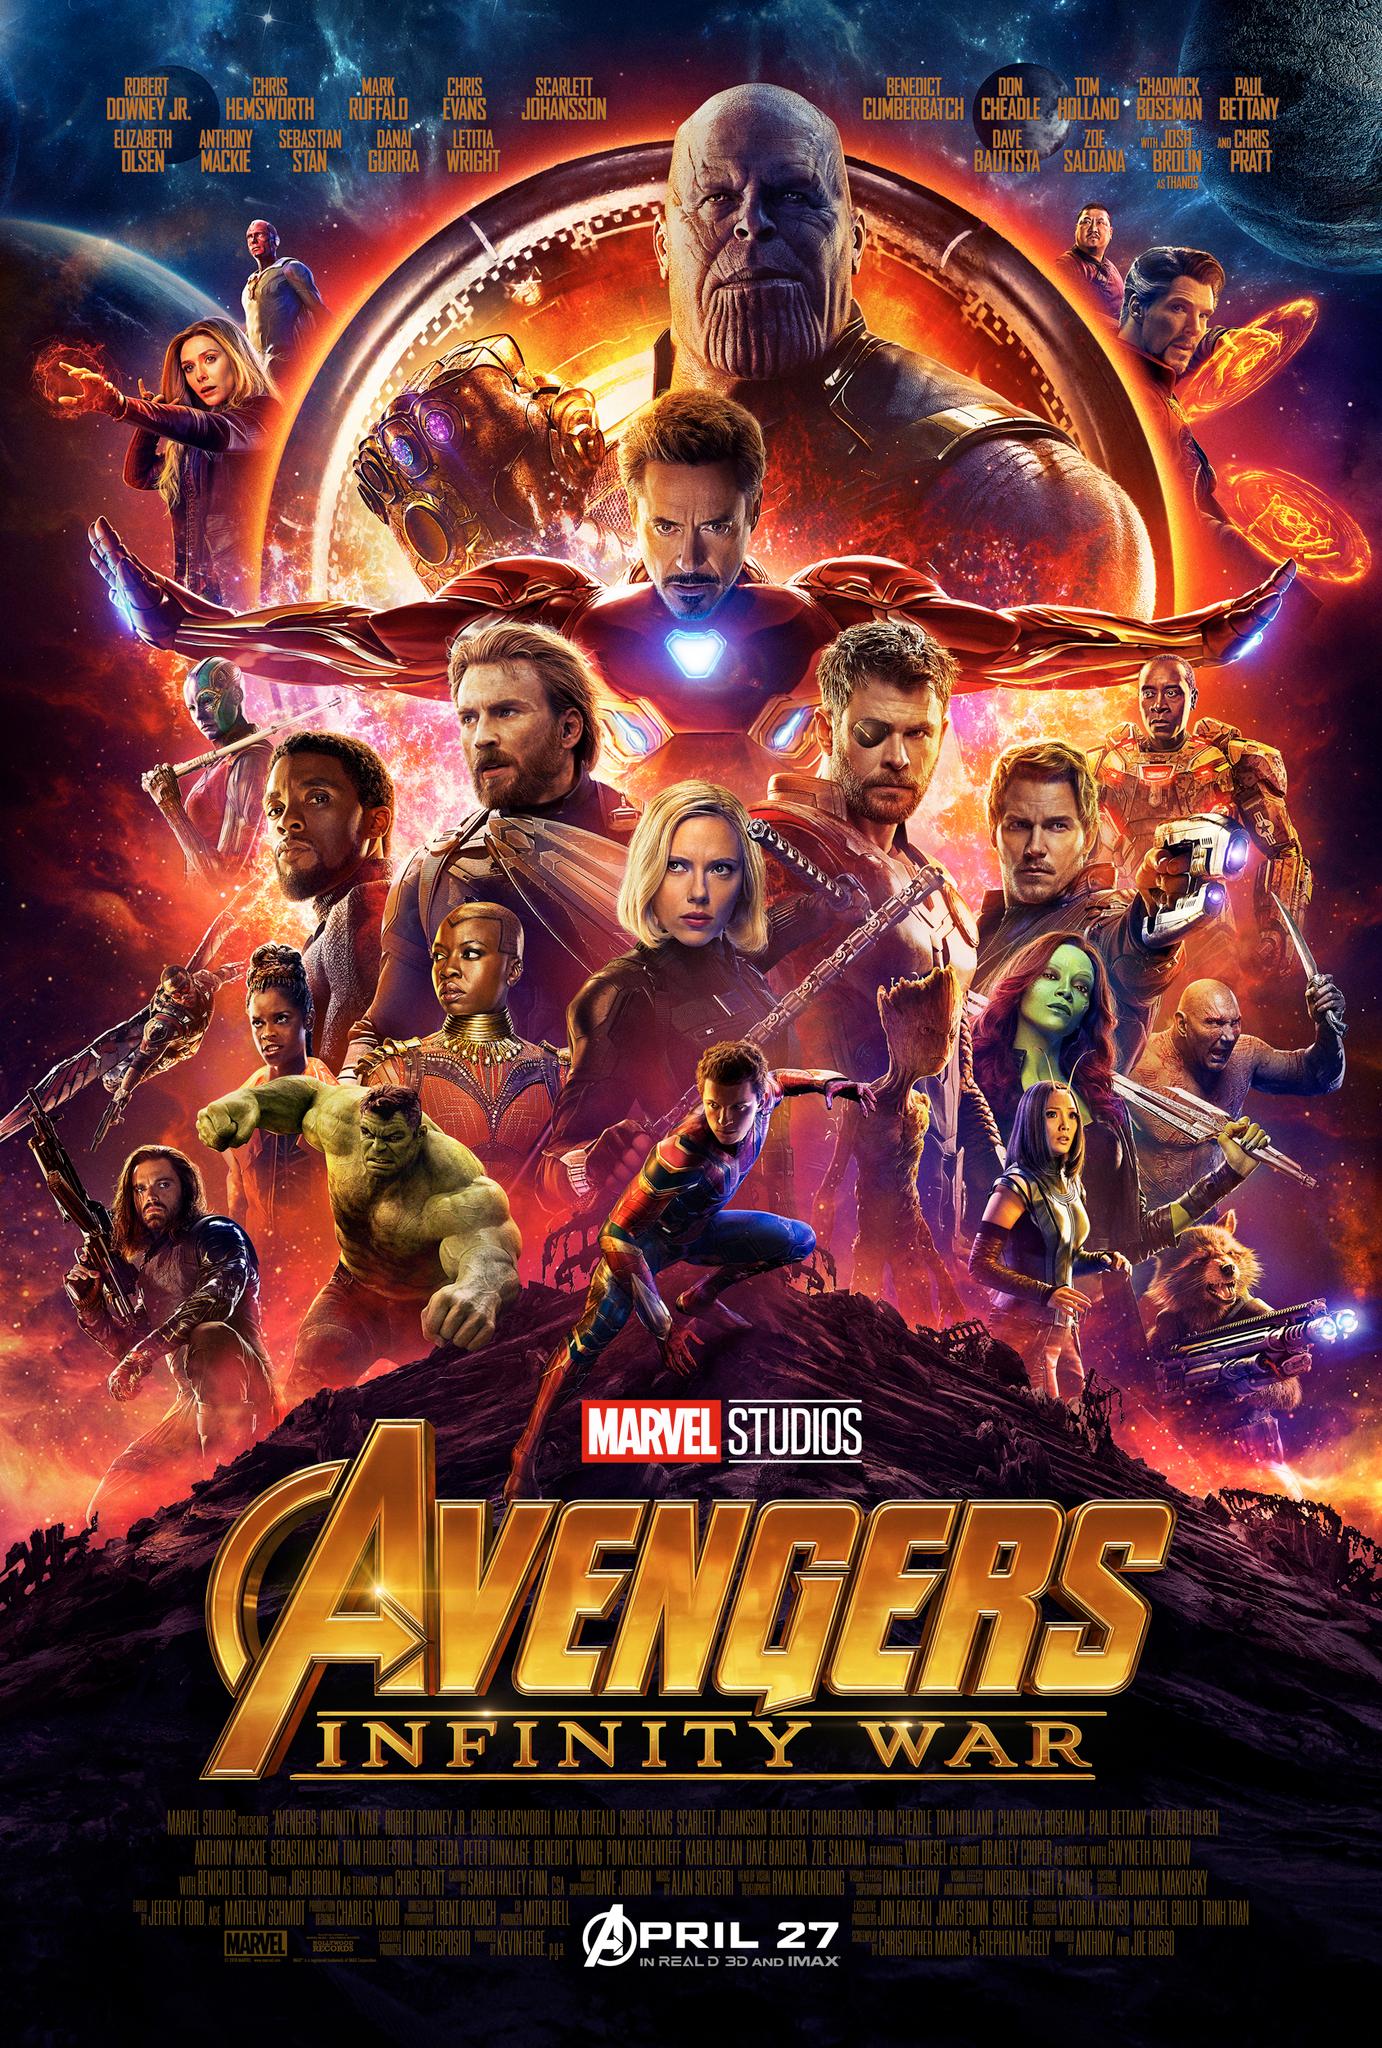 Avengers: Infinity War (April 27, 2018) - Brace yourself for an epic showdown as the Avengers and their allies unite to prevent the tyrannical Thanos from acquiring the power of the Infinity Stones.